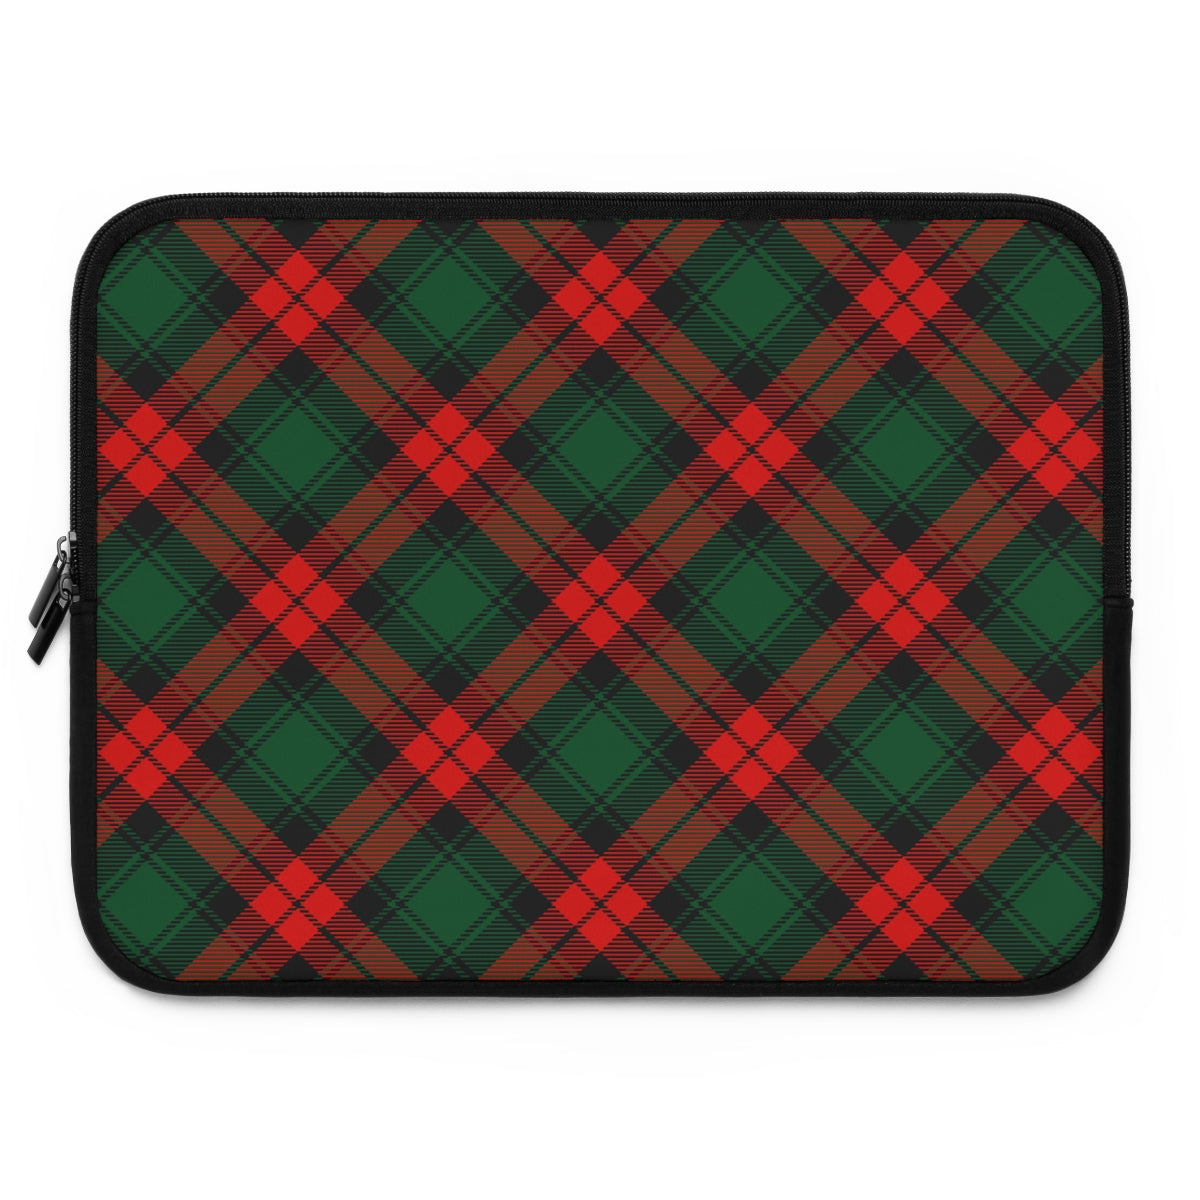 Red and Green Tartan Plaid Laptop Sleeve